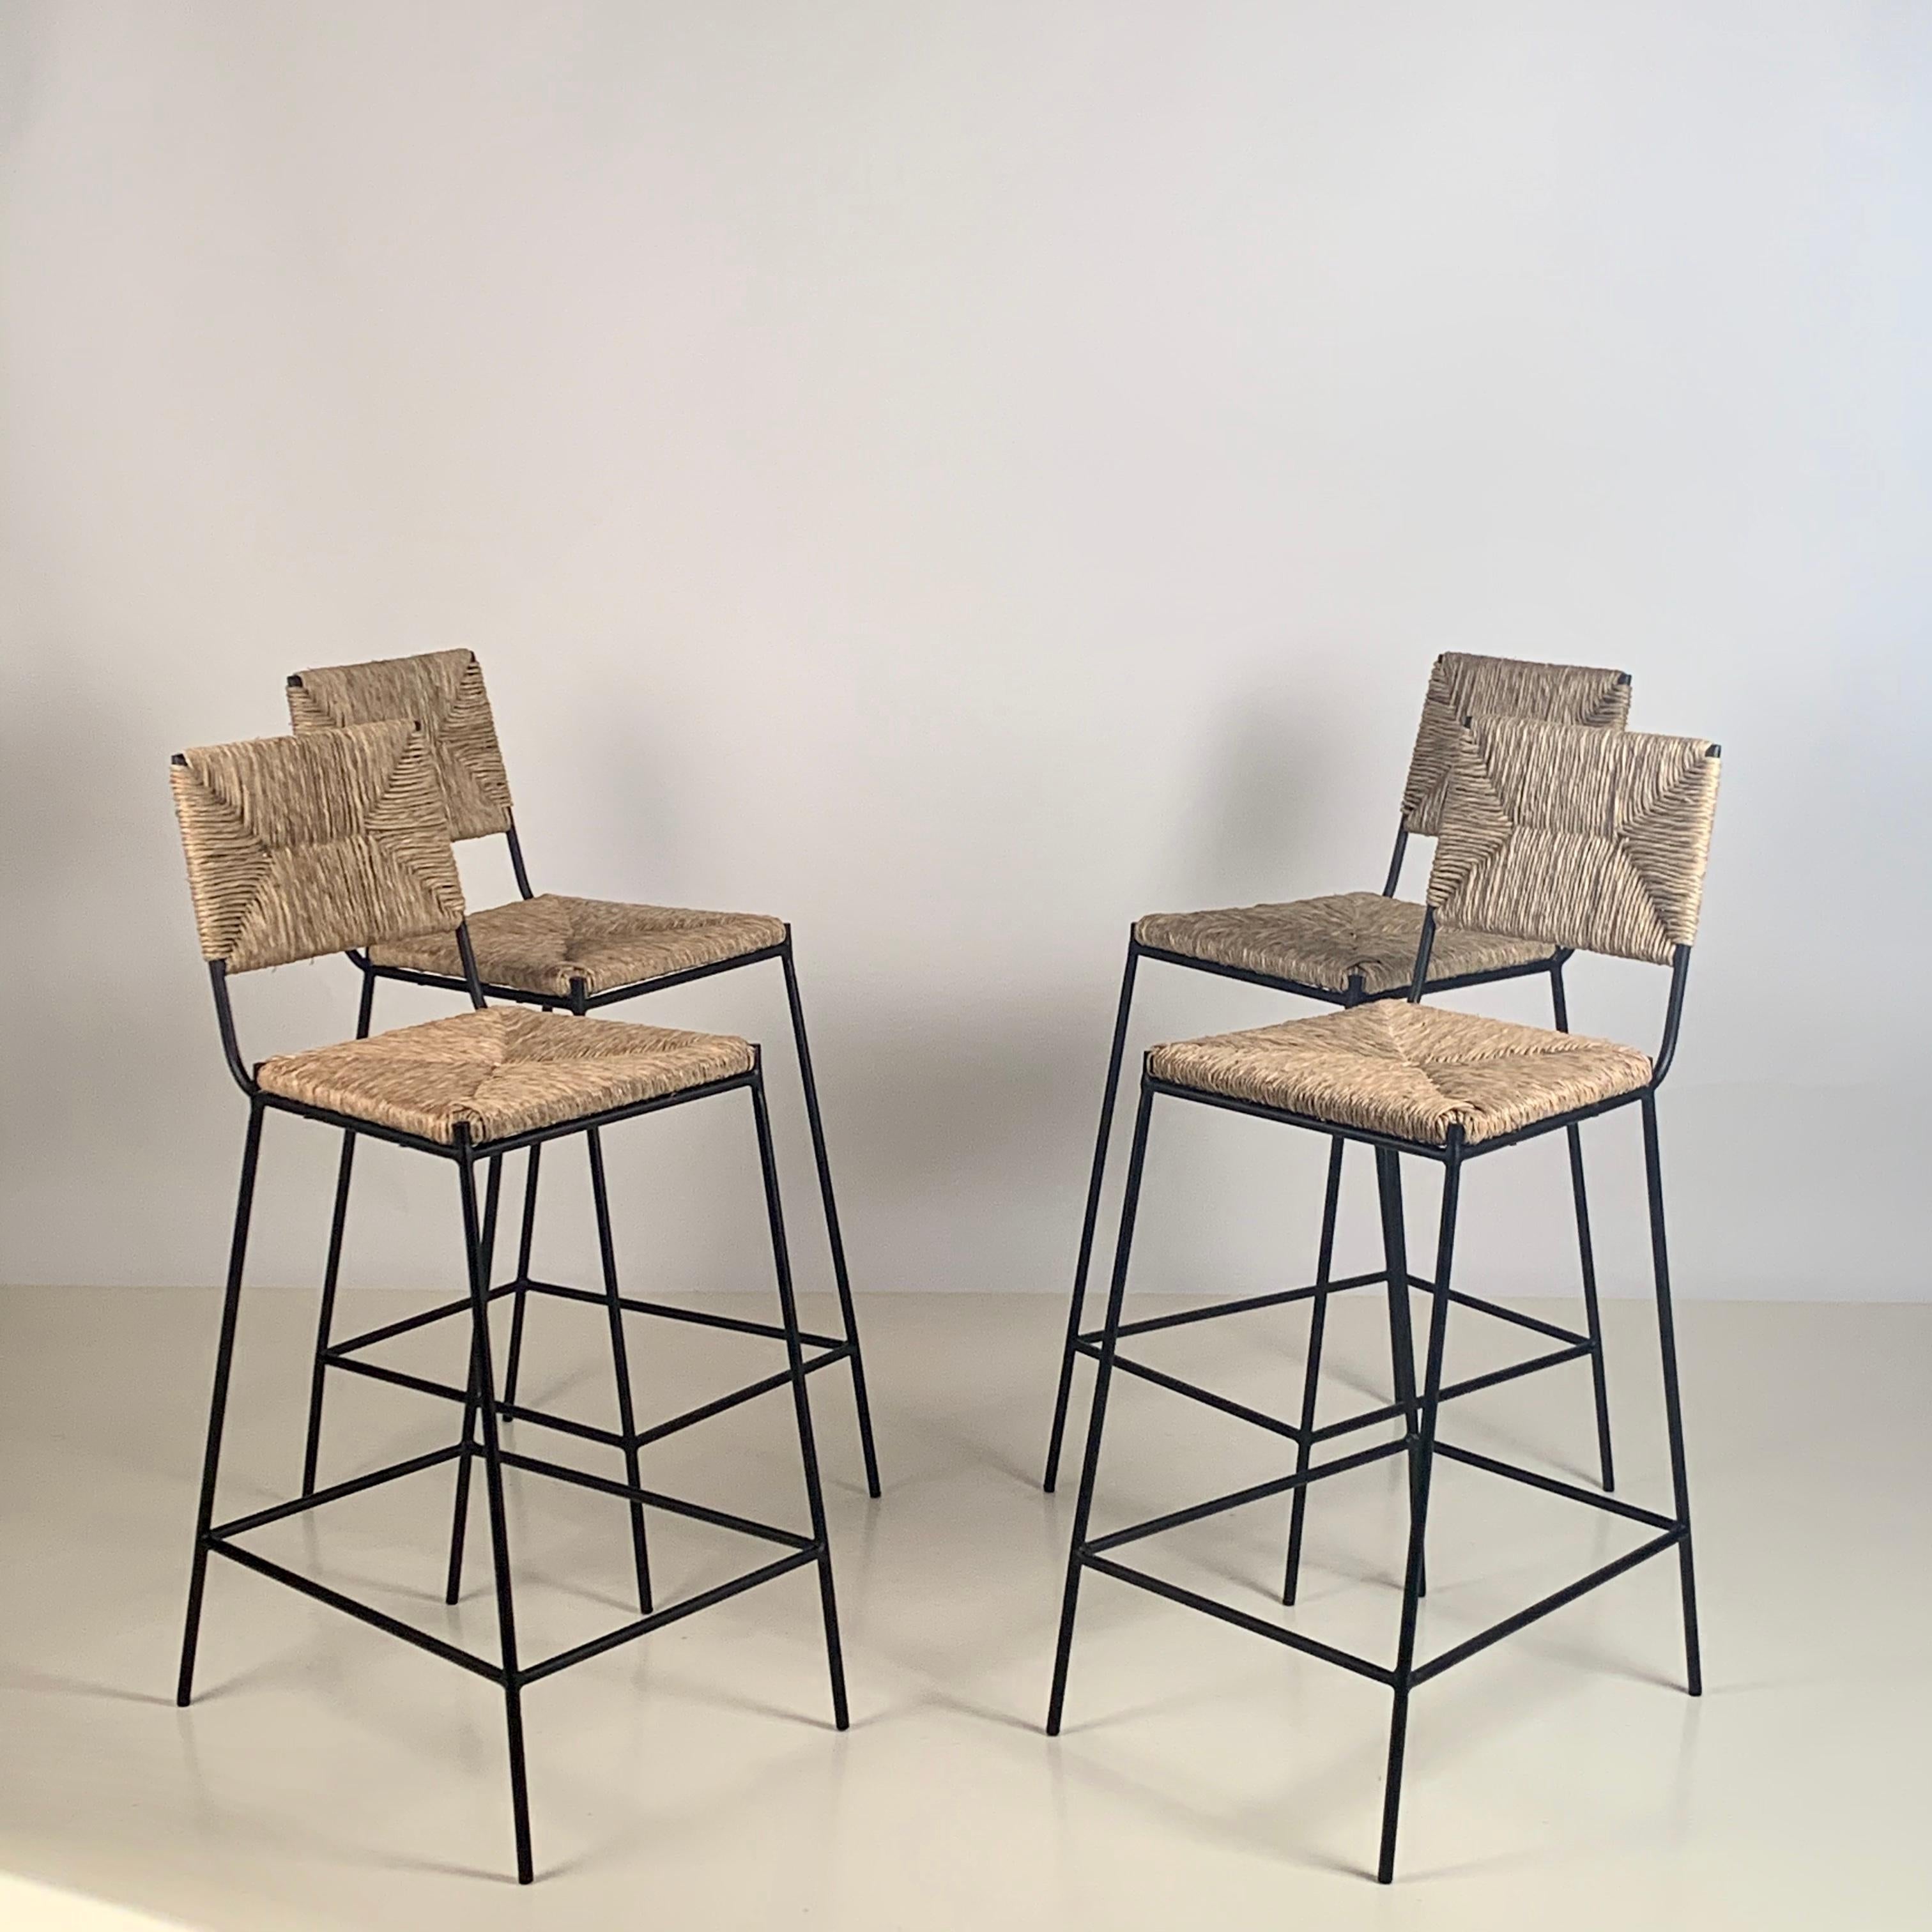 Set of 4 'Campagne' counter height stools by Design Frères.

Chic combination of slender but sturdy and stabile powder coated steel frames with handwoven rush seats and backs. Extra support under the rush seat for durability. Durable plastic caps